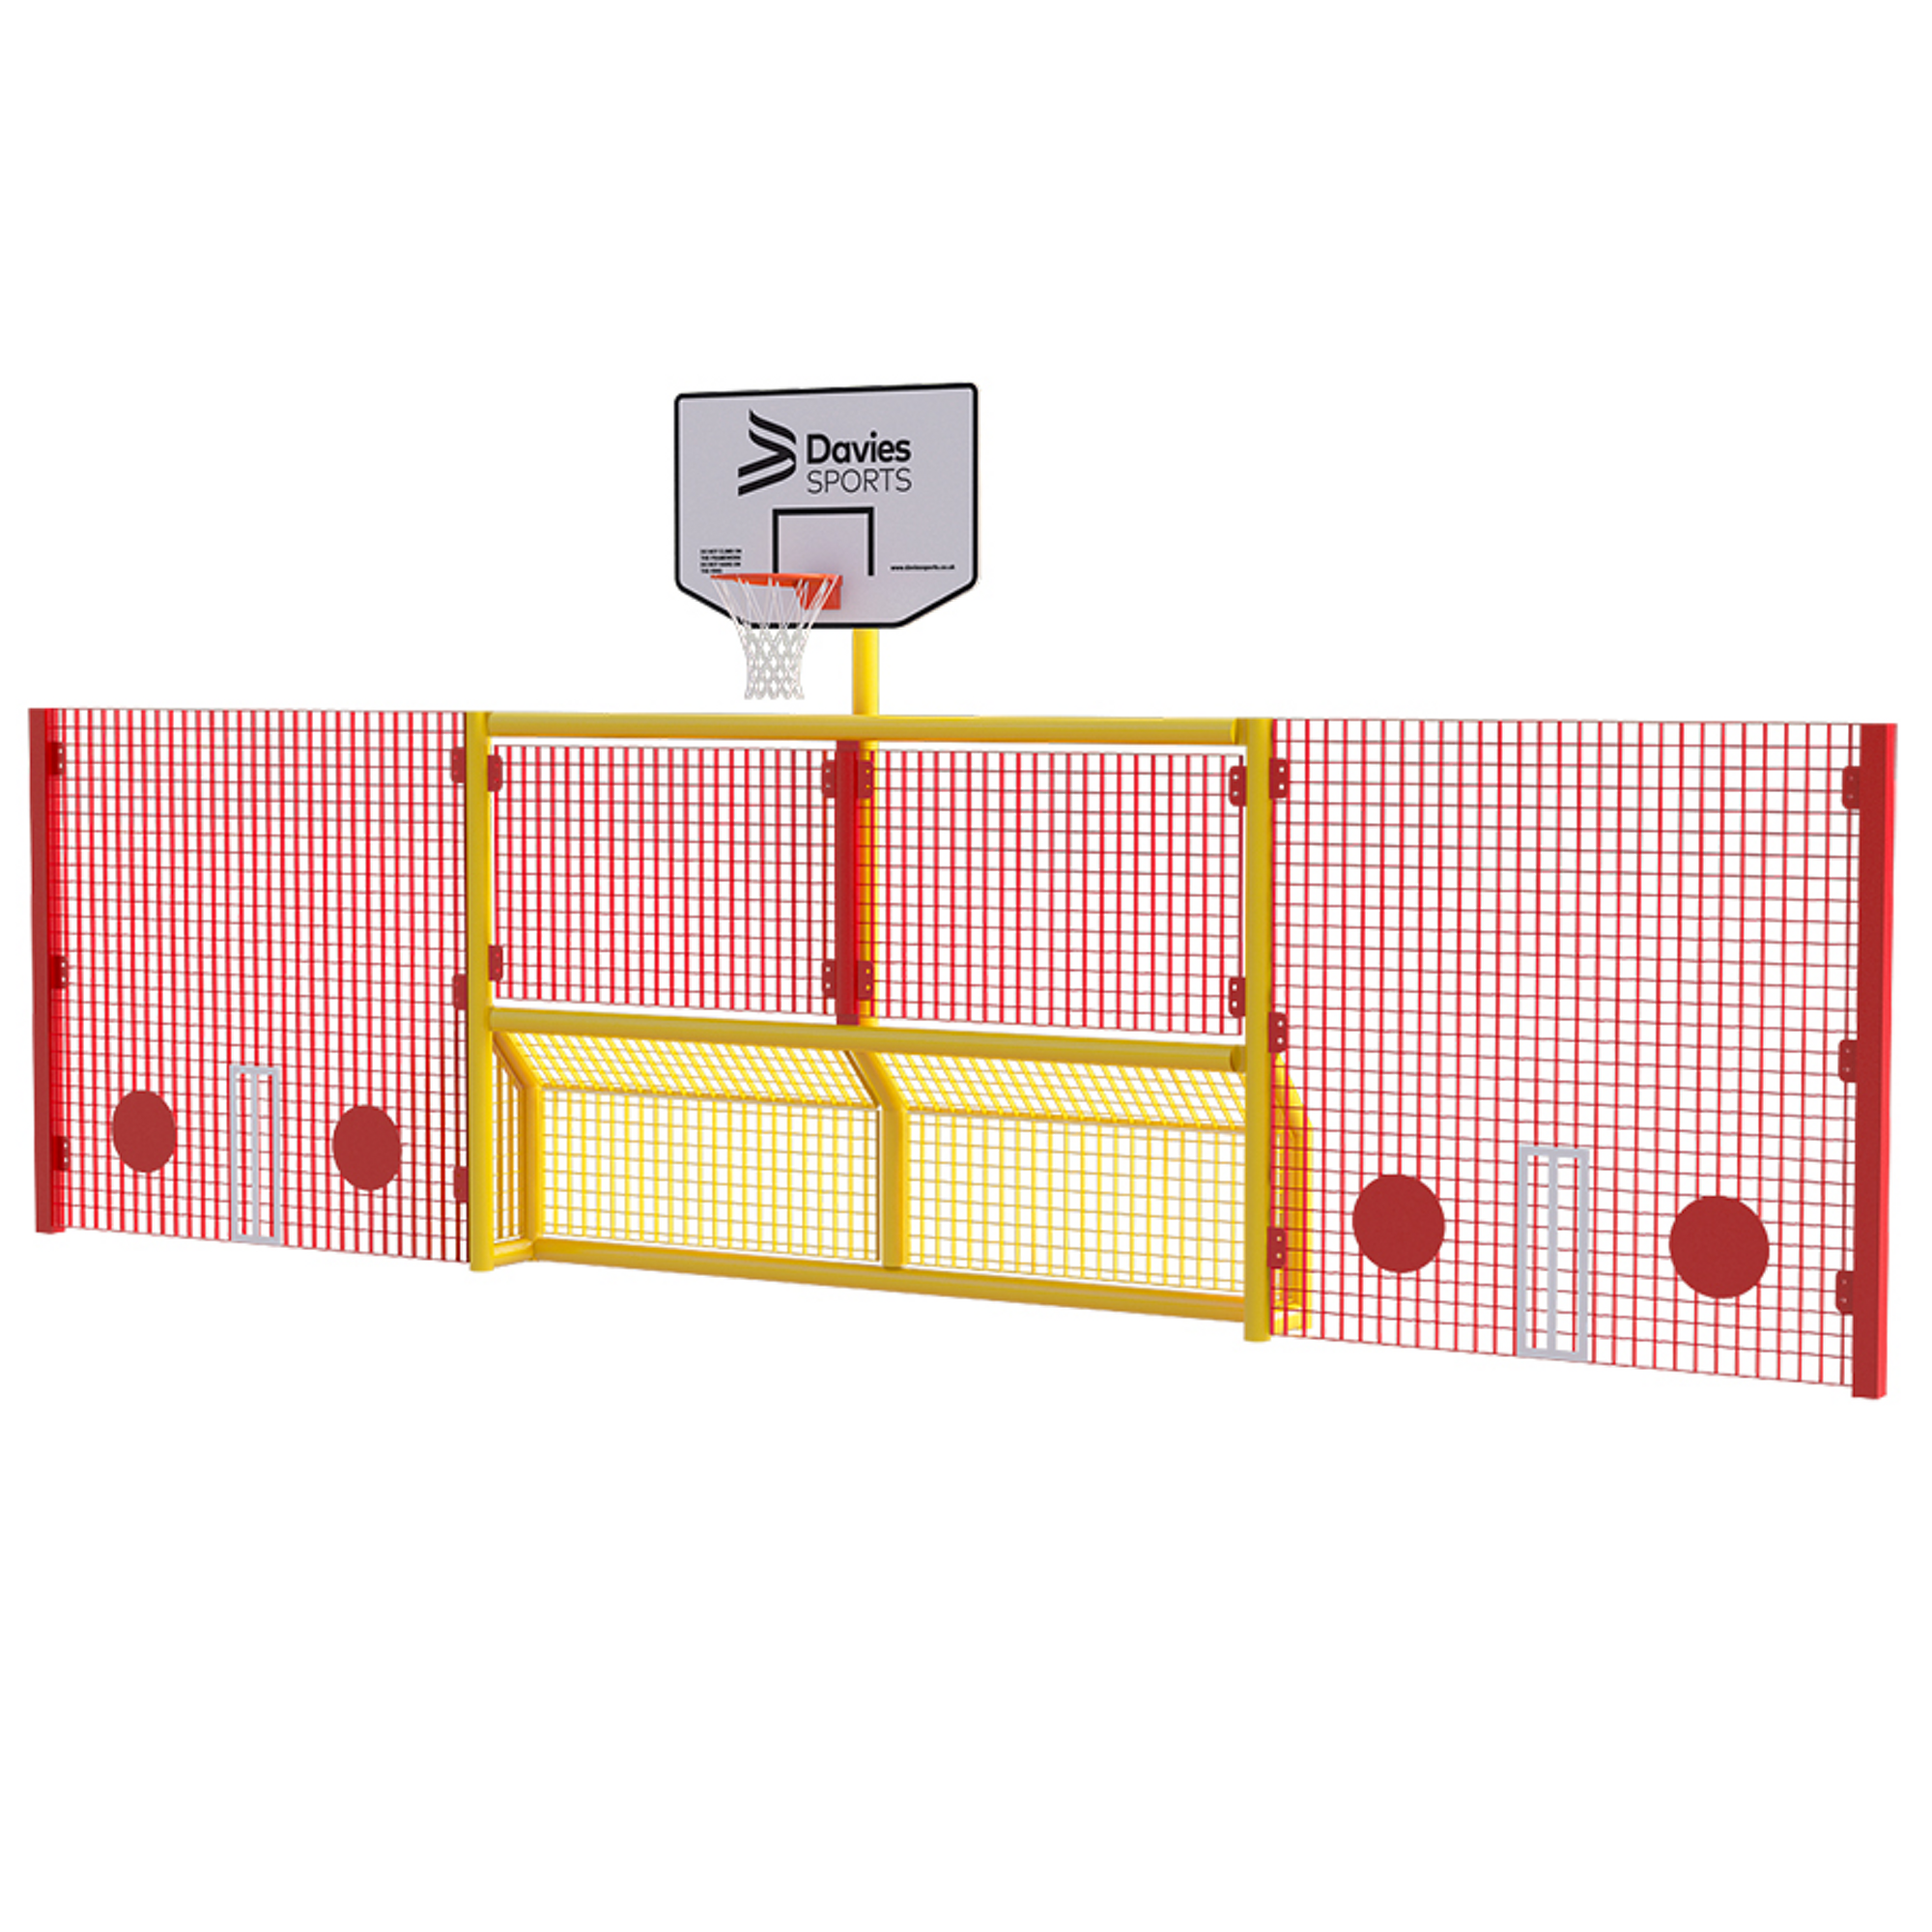 Primary High Sides Bball Yel Frame Red